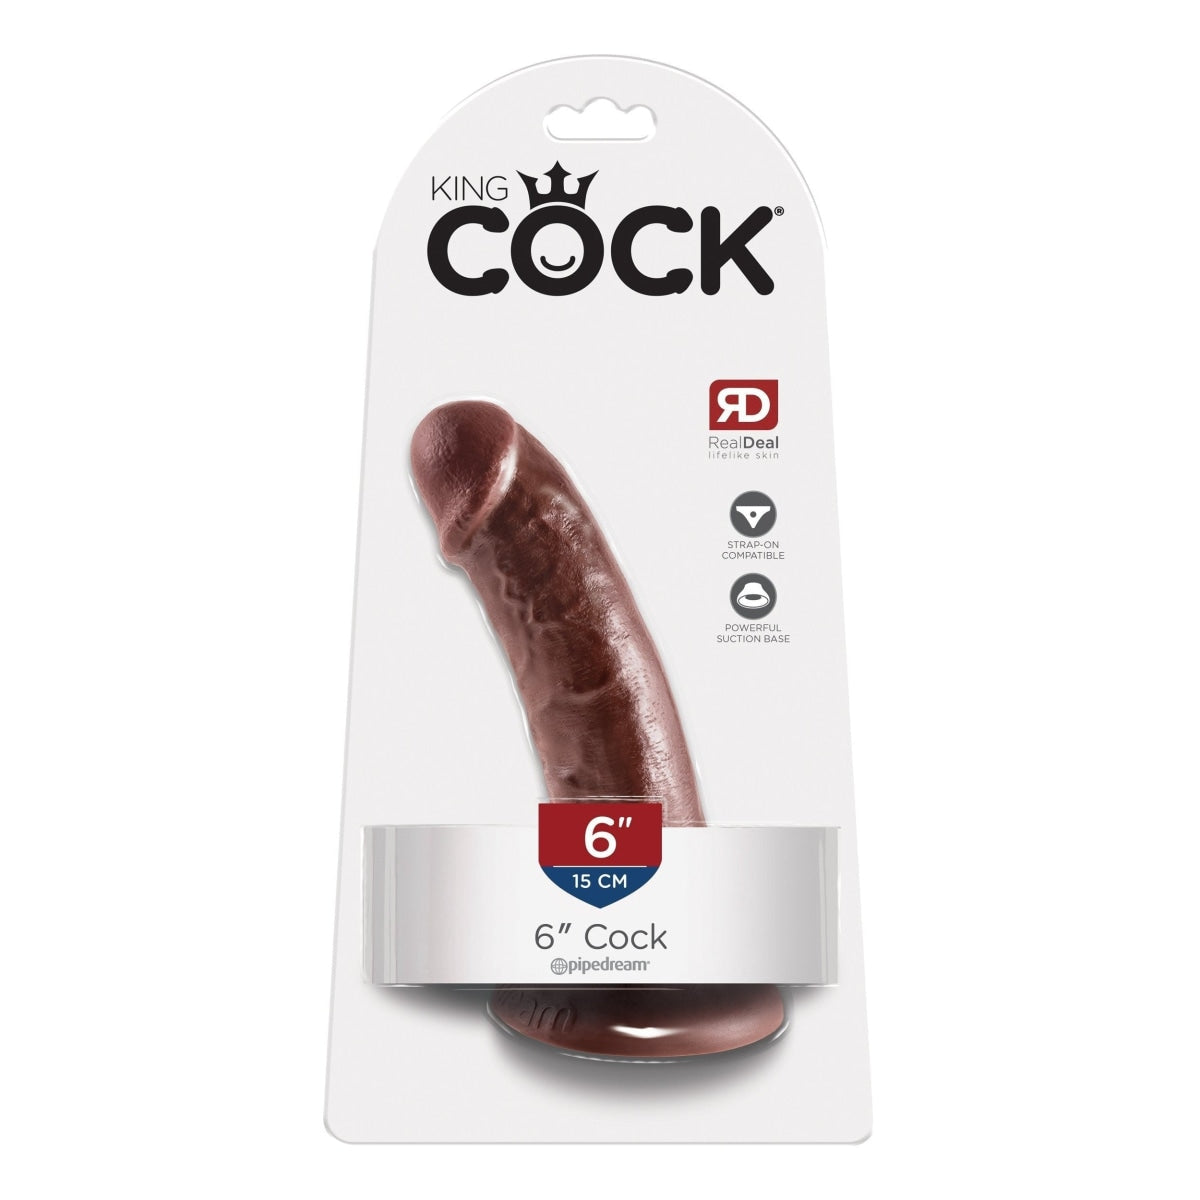 King Cock 6 In Cock Brown Intimates Adult Boutique